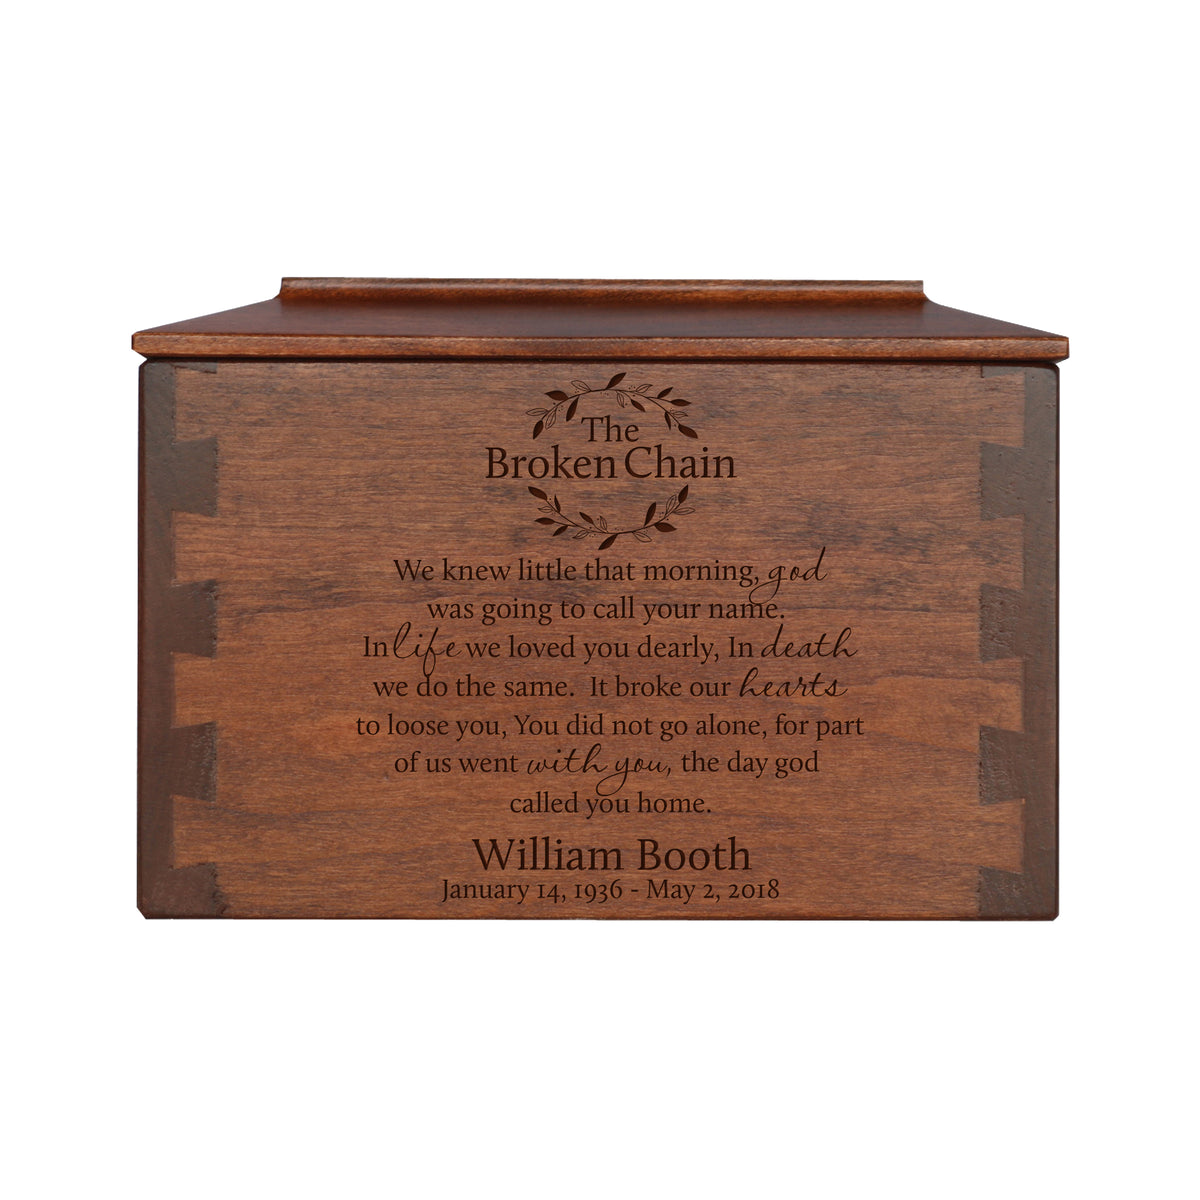 LifeSong Milestones Personalized Small Cherry Dovetail Wooden Urn for Pet Ashes Urn Keepsake Box 7.75” x 4.75” x 4.75”